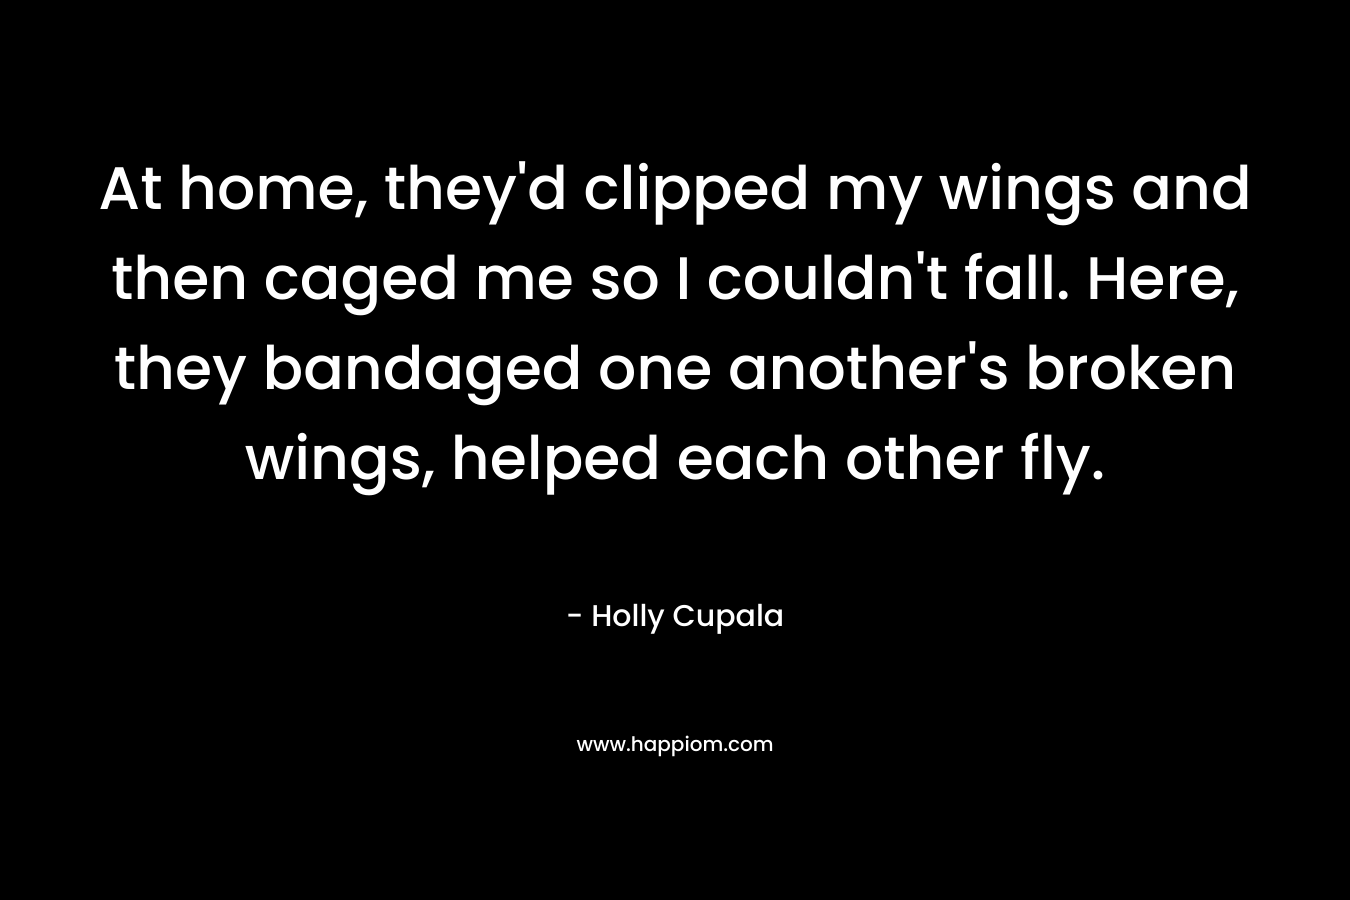 At home, they’d clipped my wings and then caged me so I couldn’t fall. Here, they bandaged one another’s broken wings, helped each other fly. – Holly Cupala